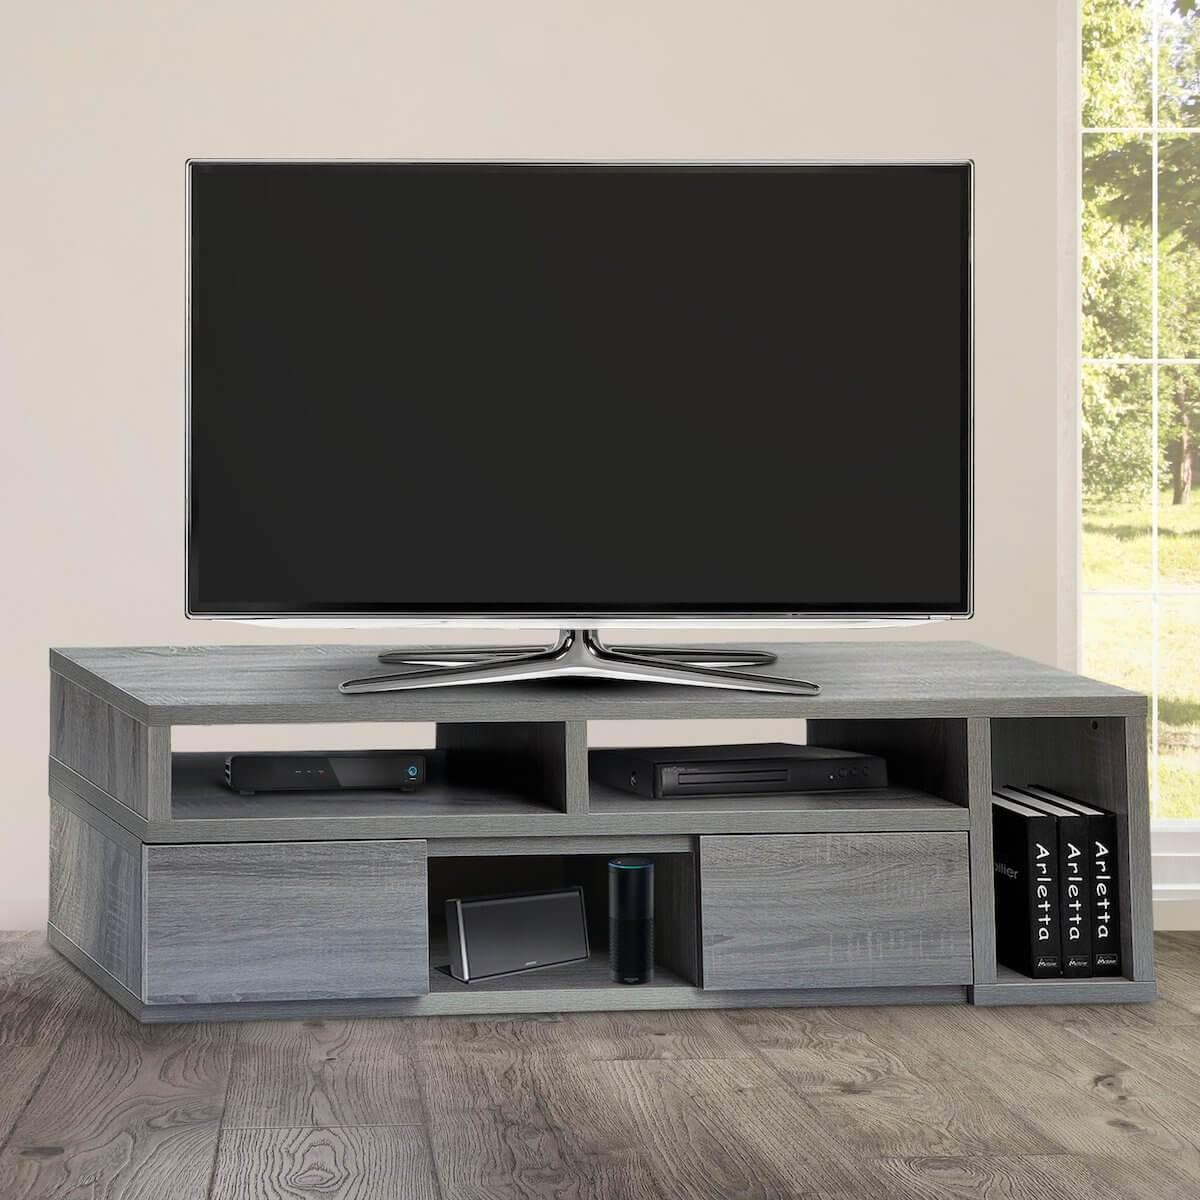 Techni Mobili Adjustable TV Stand Console for TVs Up to 65" RTA-7050-GRY in Room